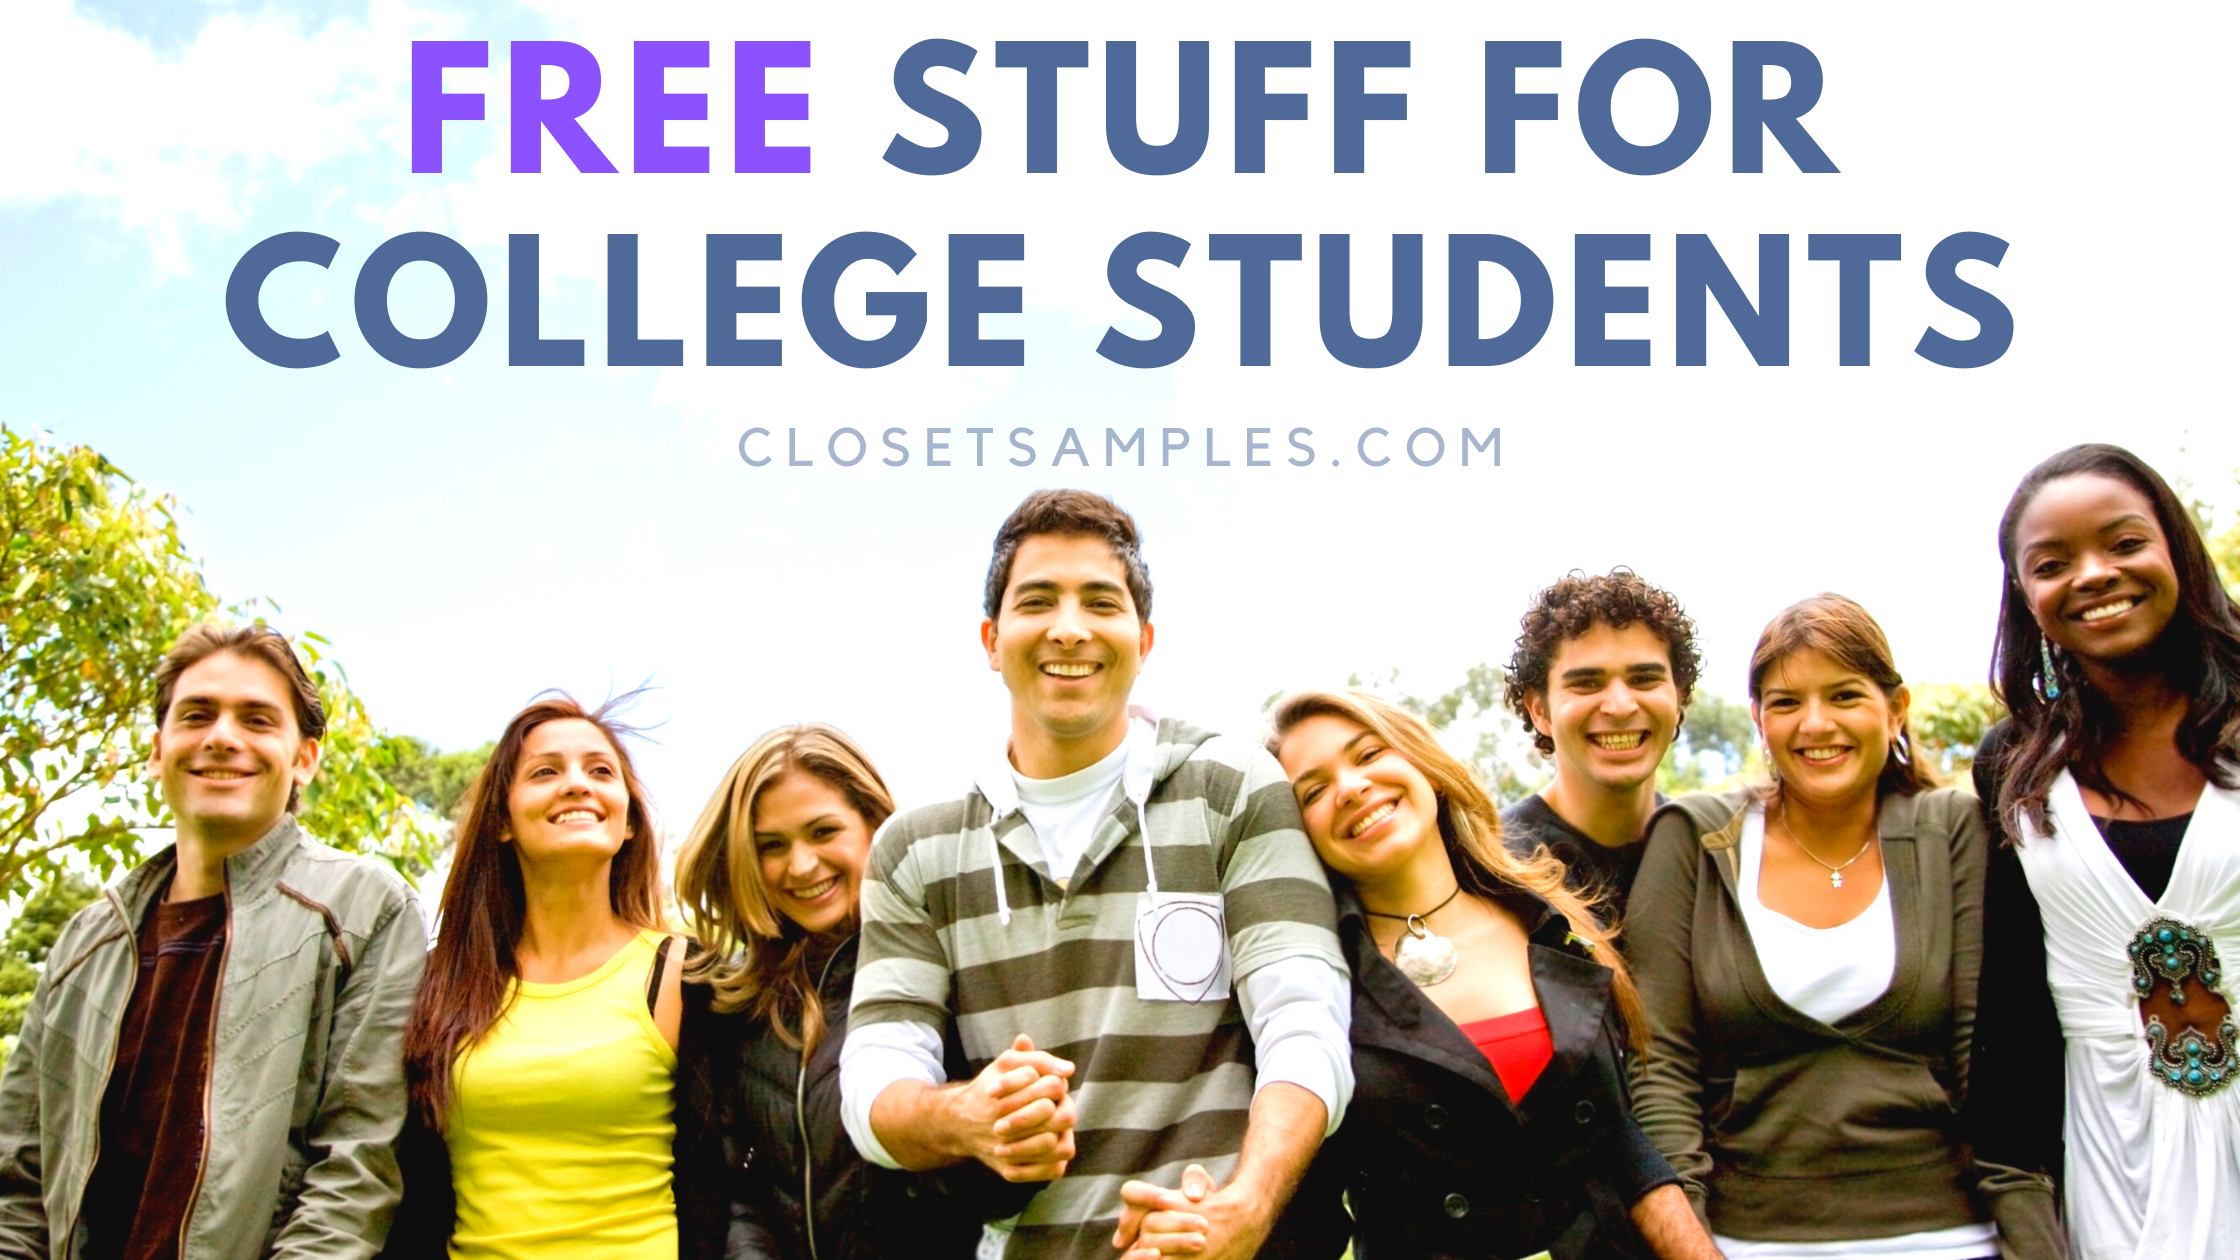 FREE-Stuff-for-College-Students-closetsamples.png